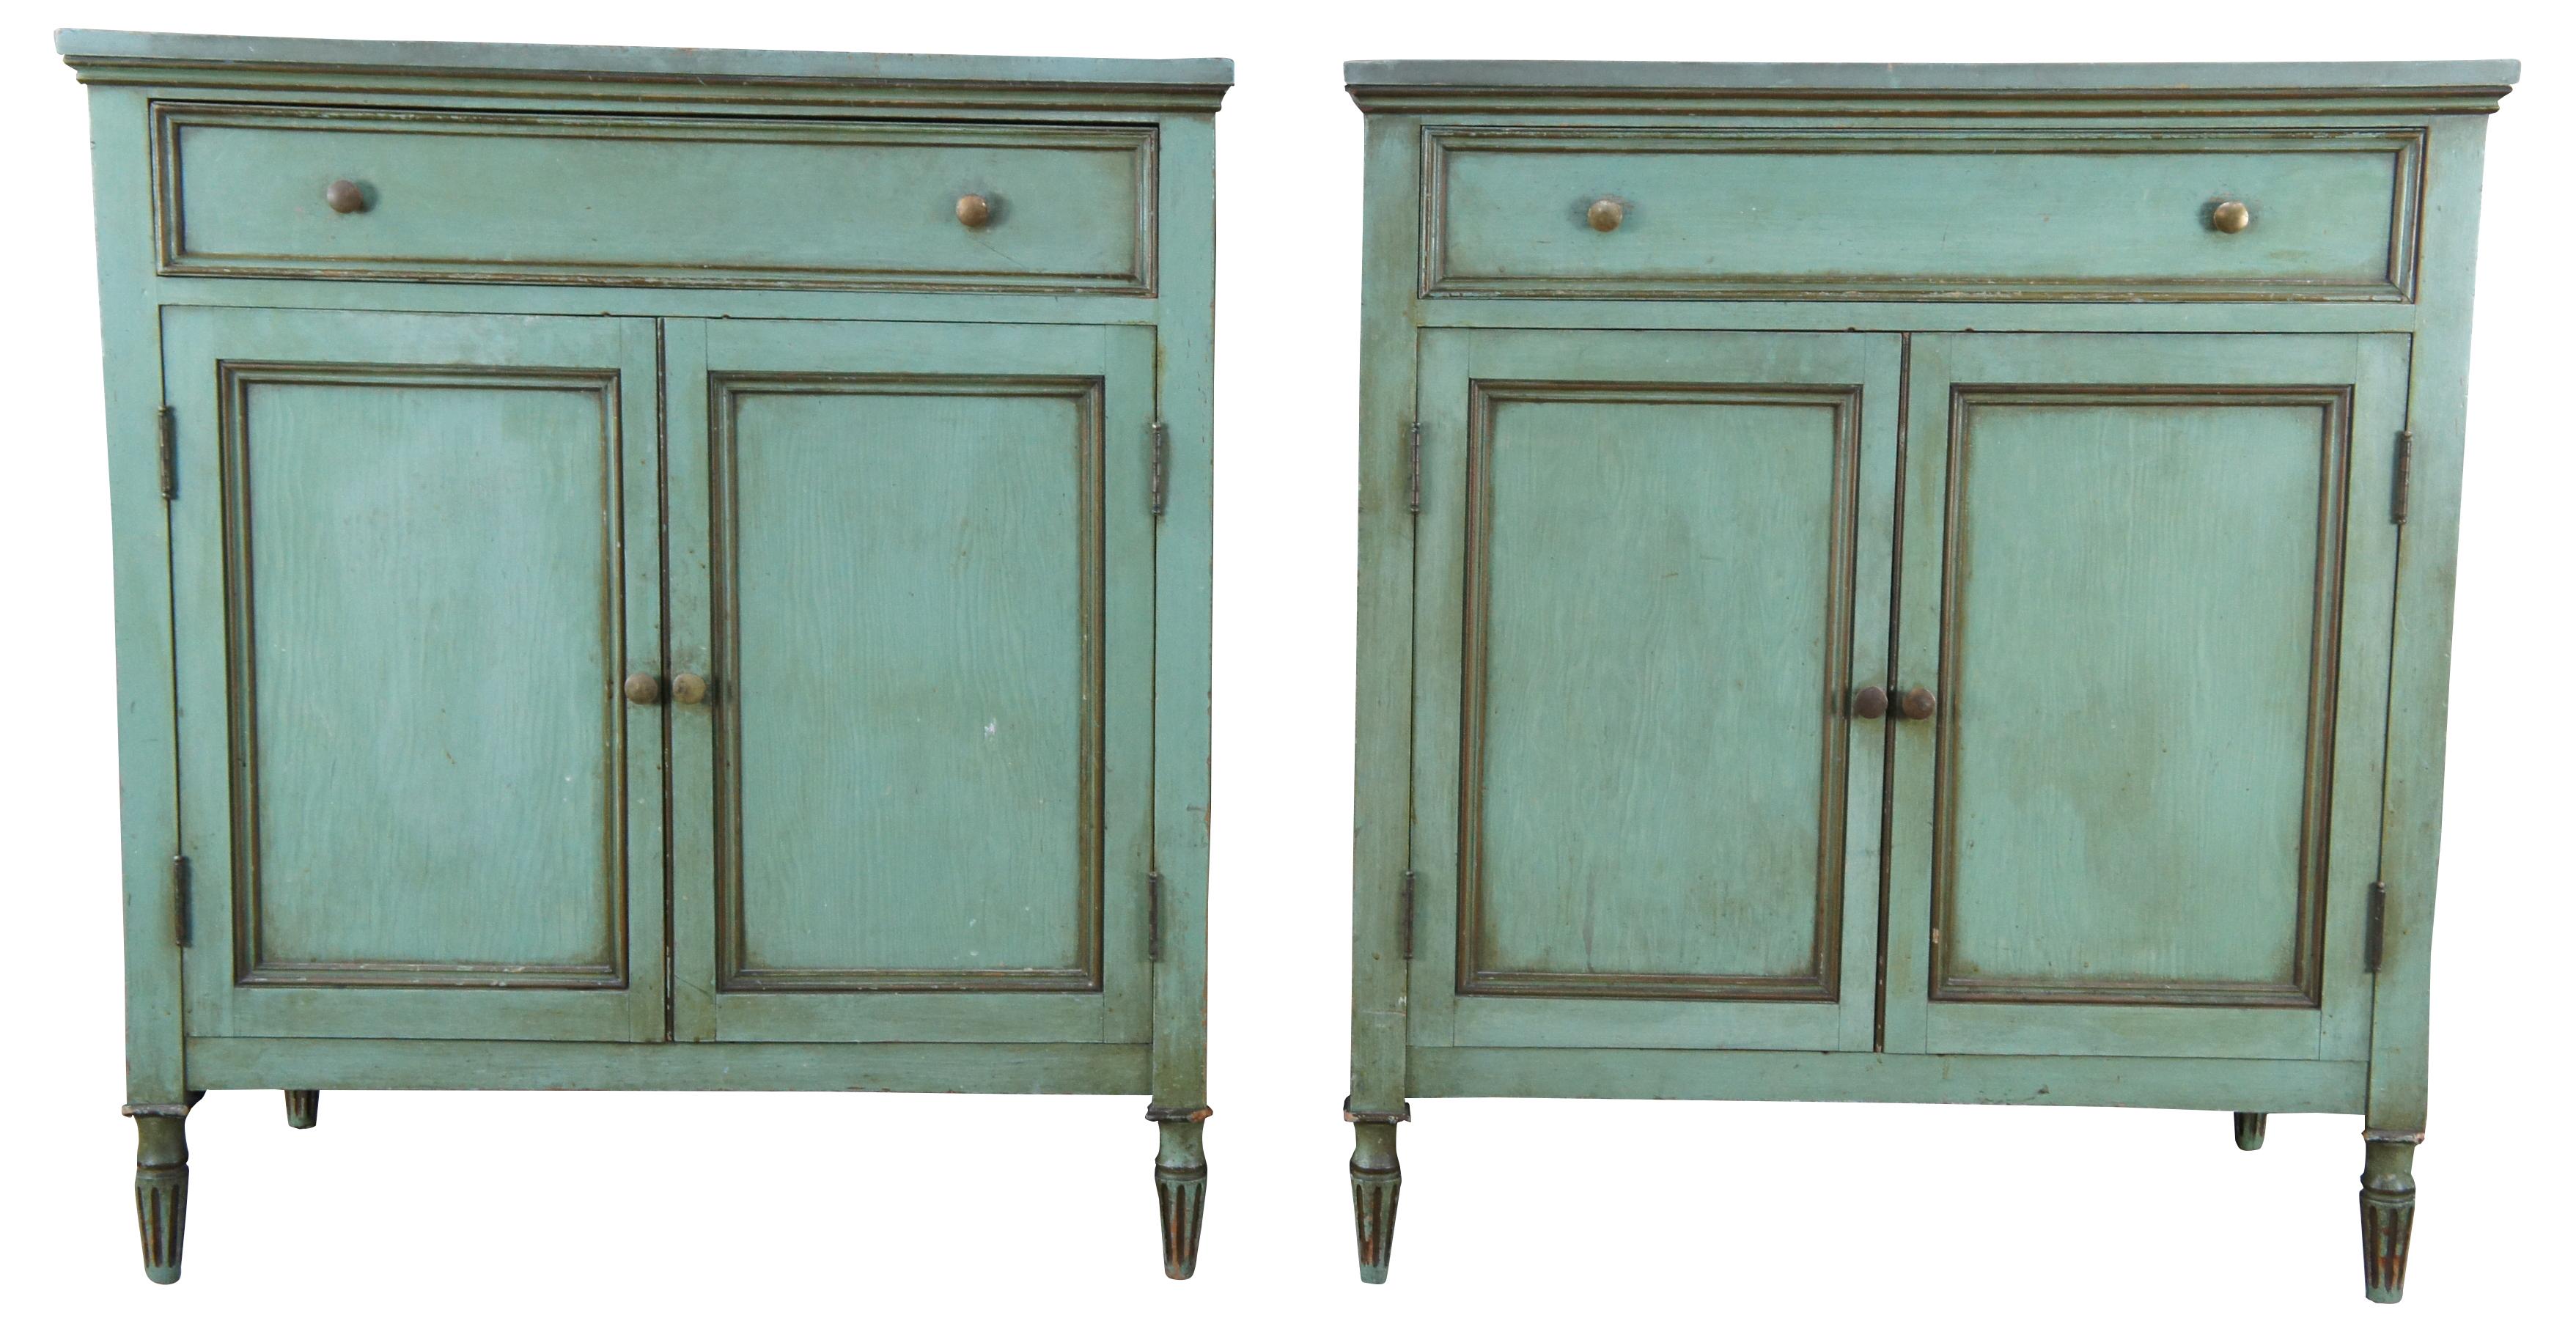 Two vintage Louis XVI style farmhouse storage cabinets. Each is in the form of an old pie safe or jelly cabinet. Featuring distressed green painted exterior with upper divided drawer and lower cabinet that opens to three pull out drawers. Suitable